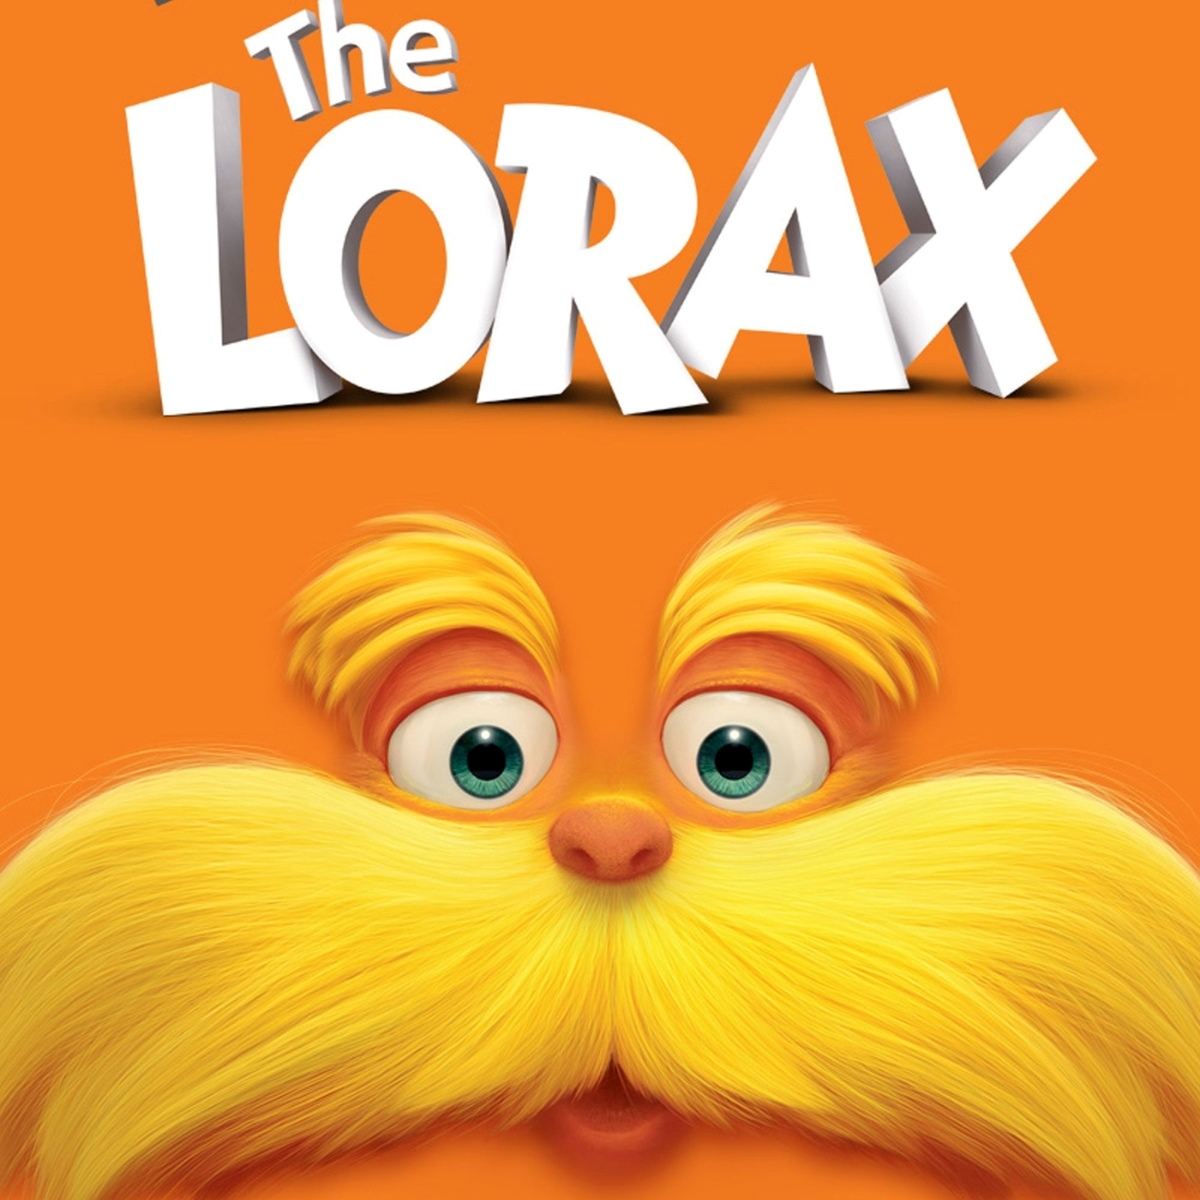 13 Facts About The Lorax (Dr. Seuss' The Lorax)